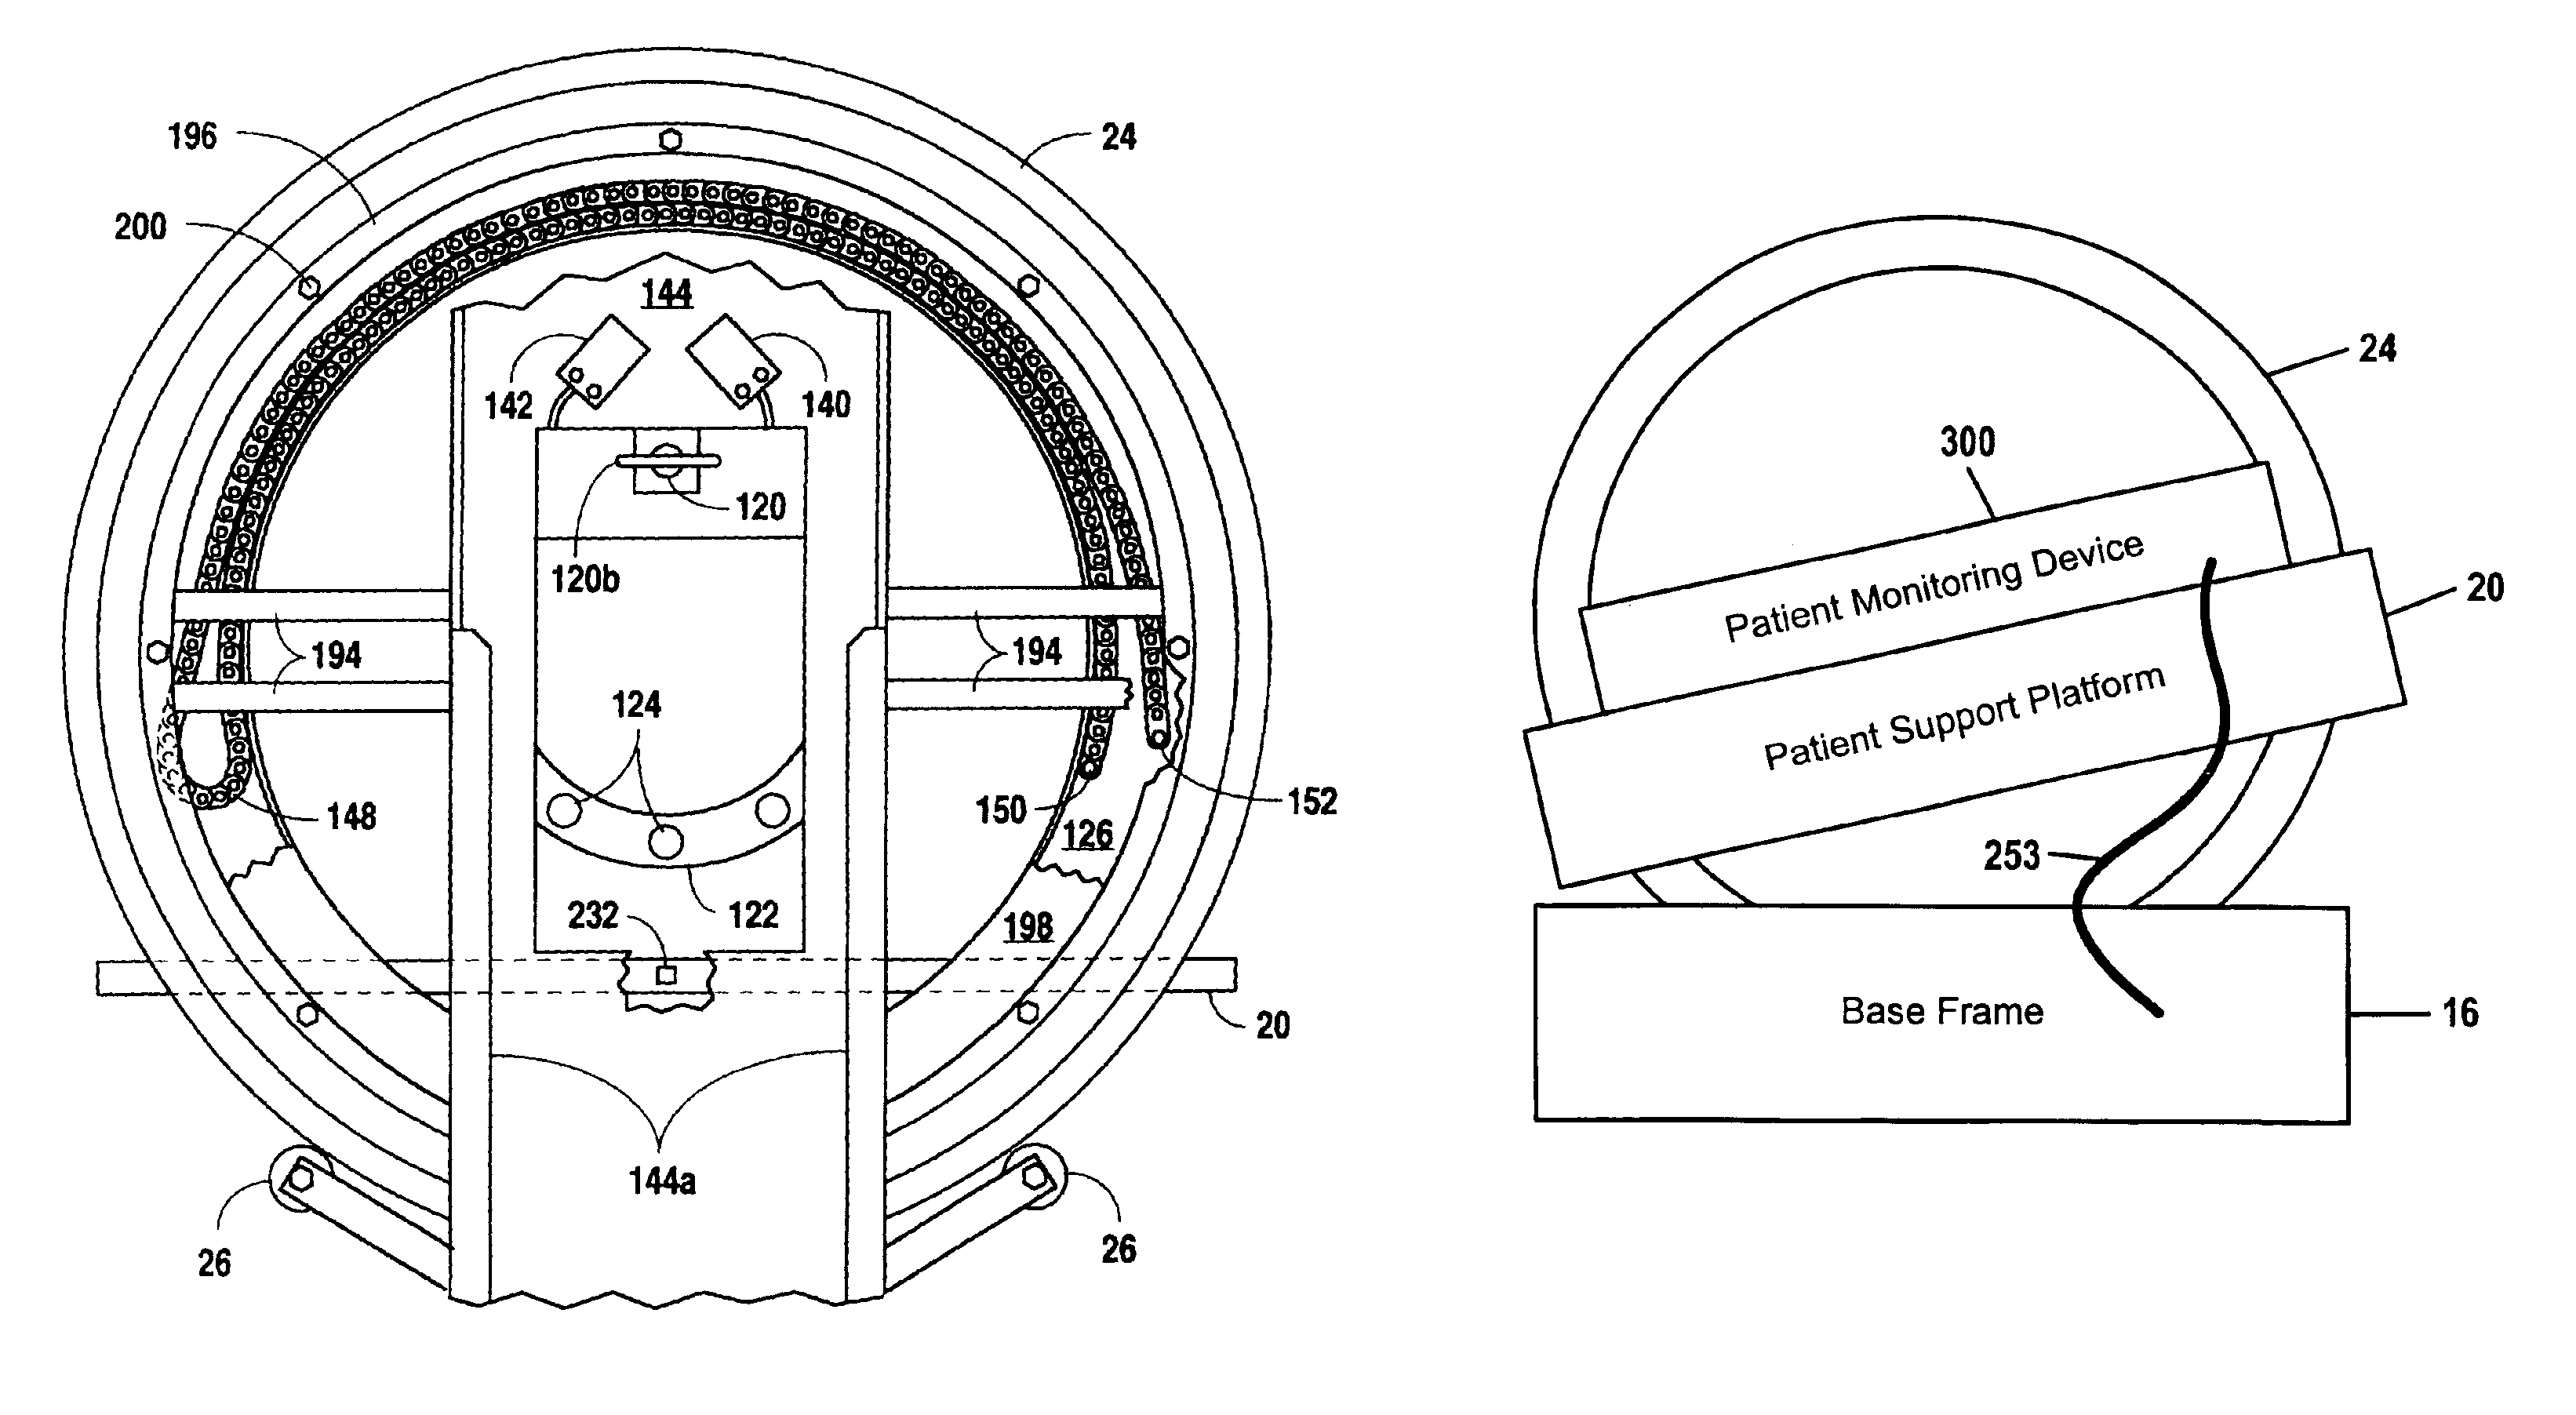 Power and electrical signal interface for a therapeutic bed